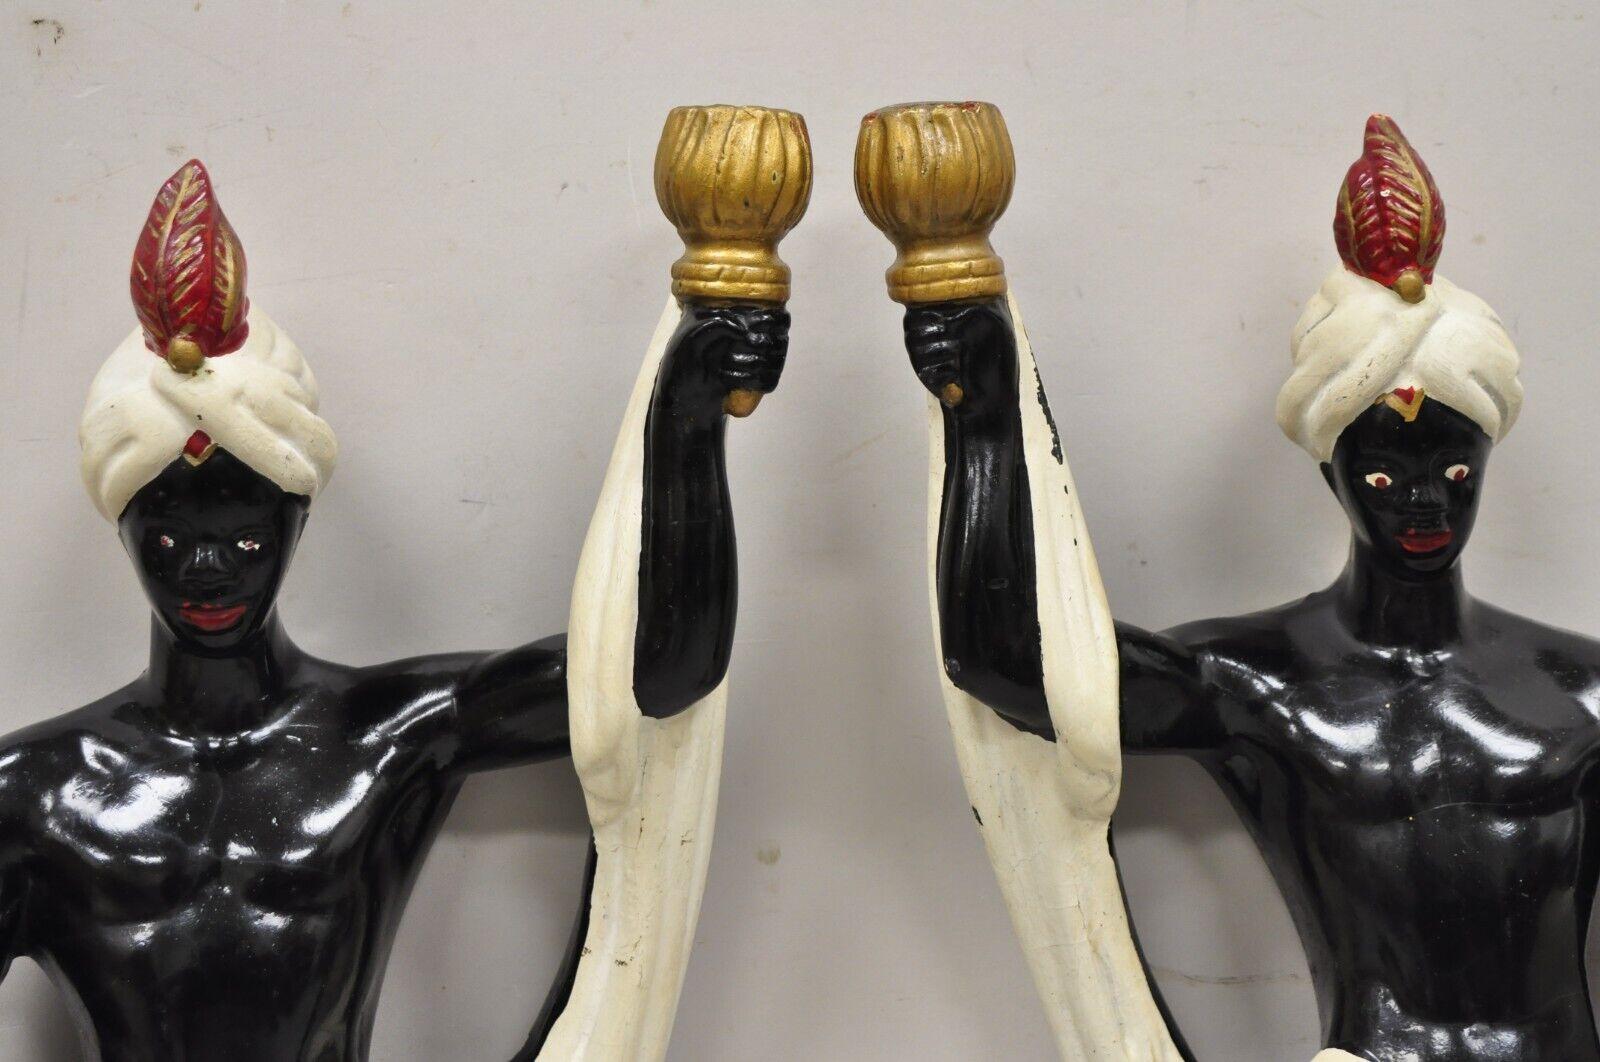 Vintage Arabian Chalkware Male Figural Wall Sconce Candlesticks - a Pair In Good Condition For Sale In Philadelphia, PA